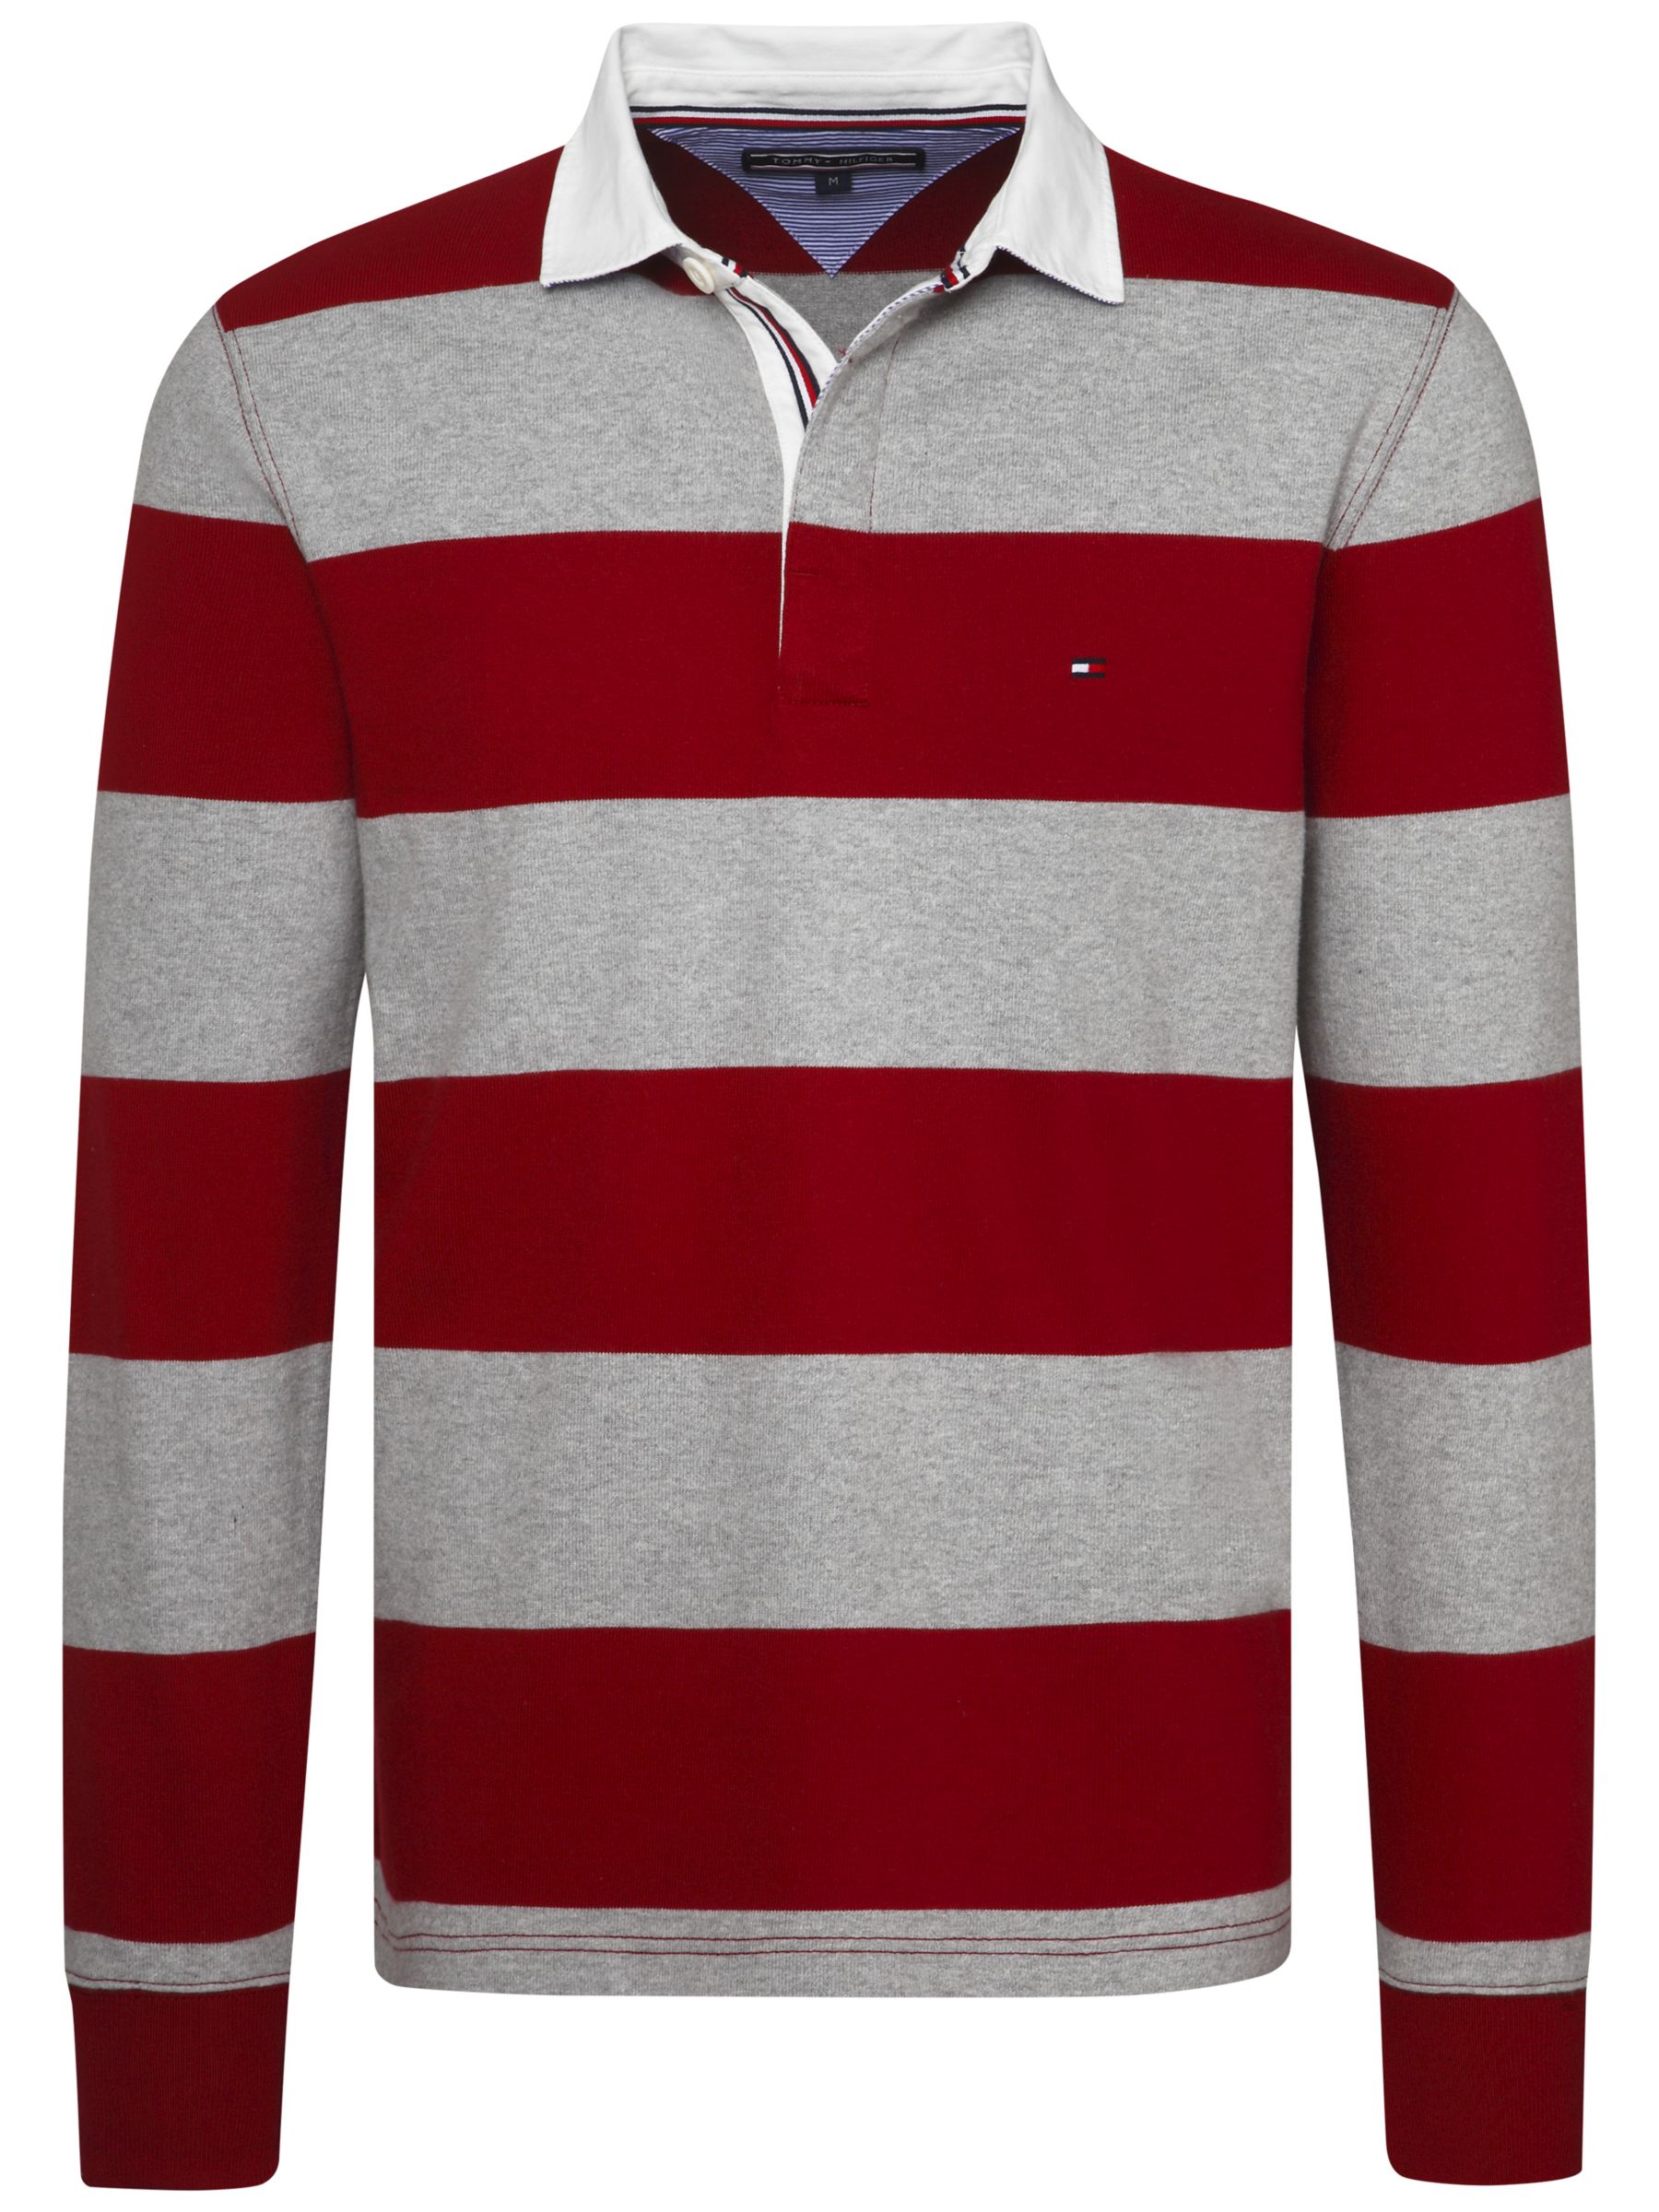 red and gray striped shirt